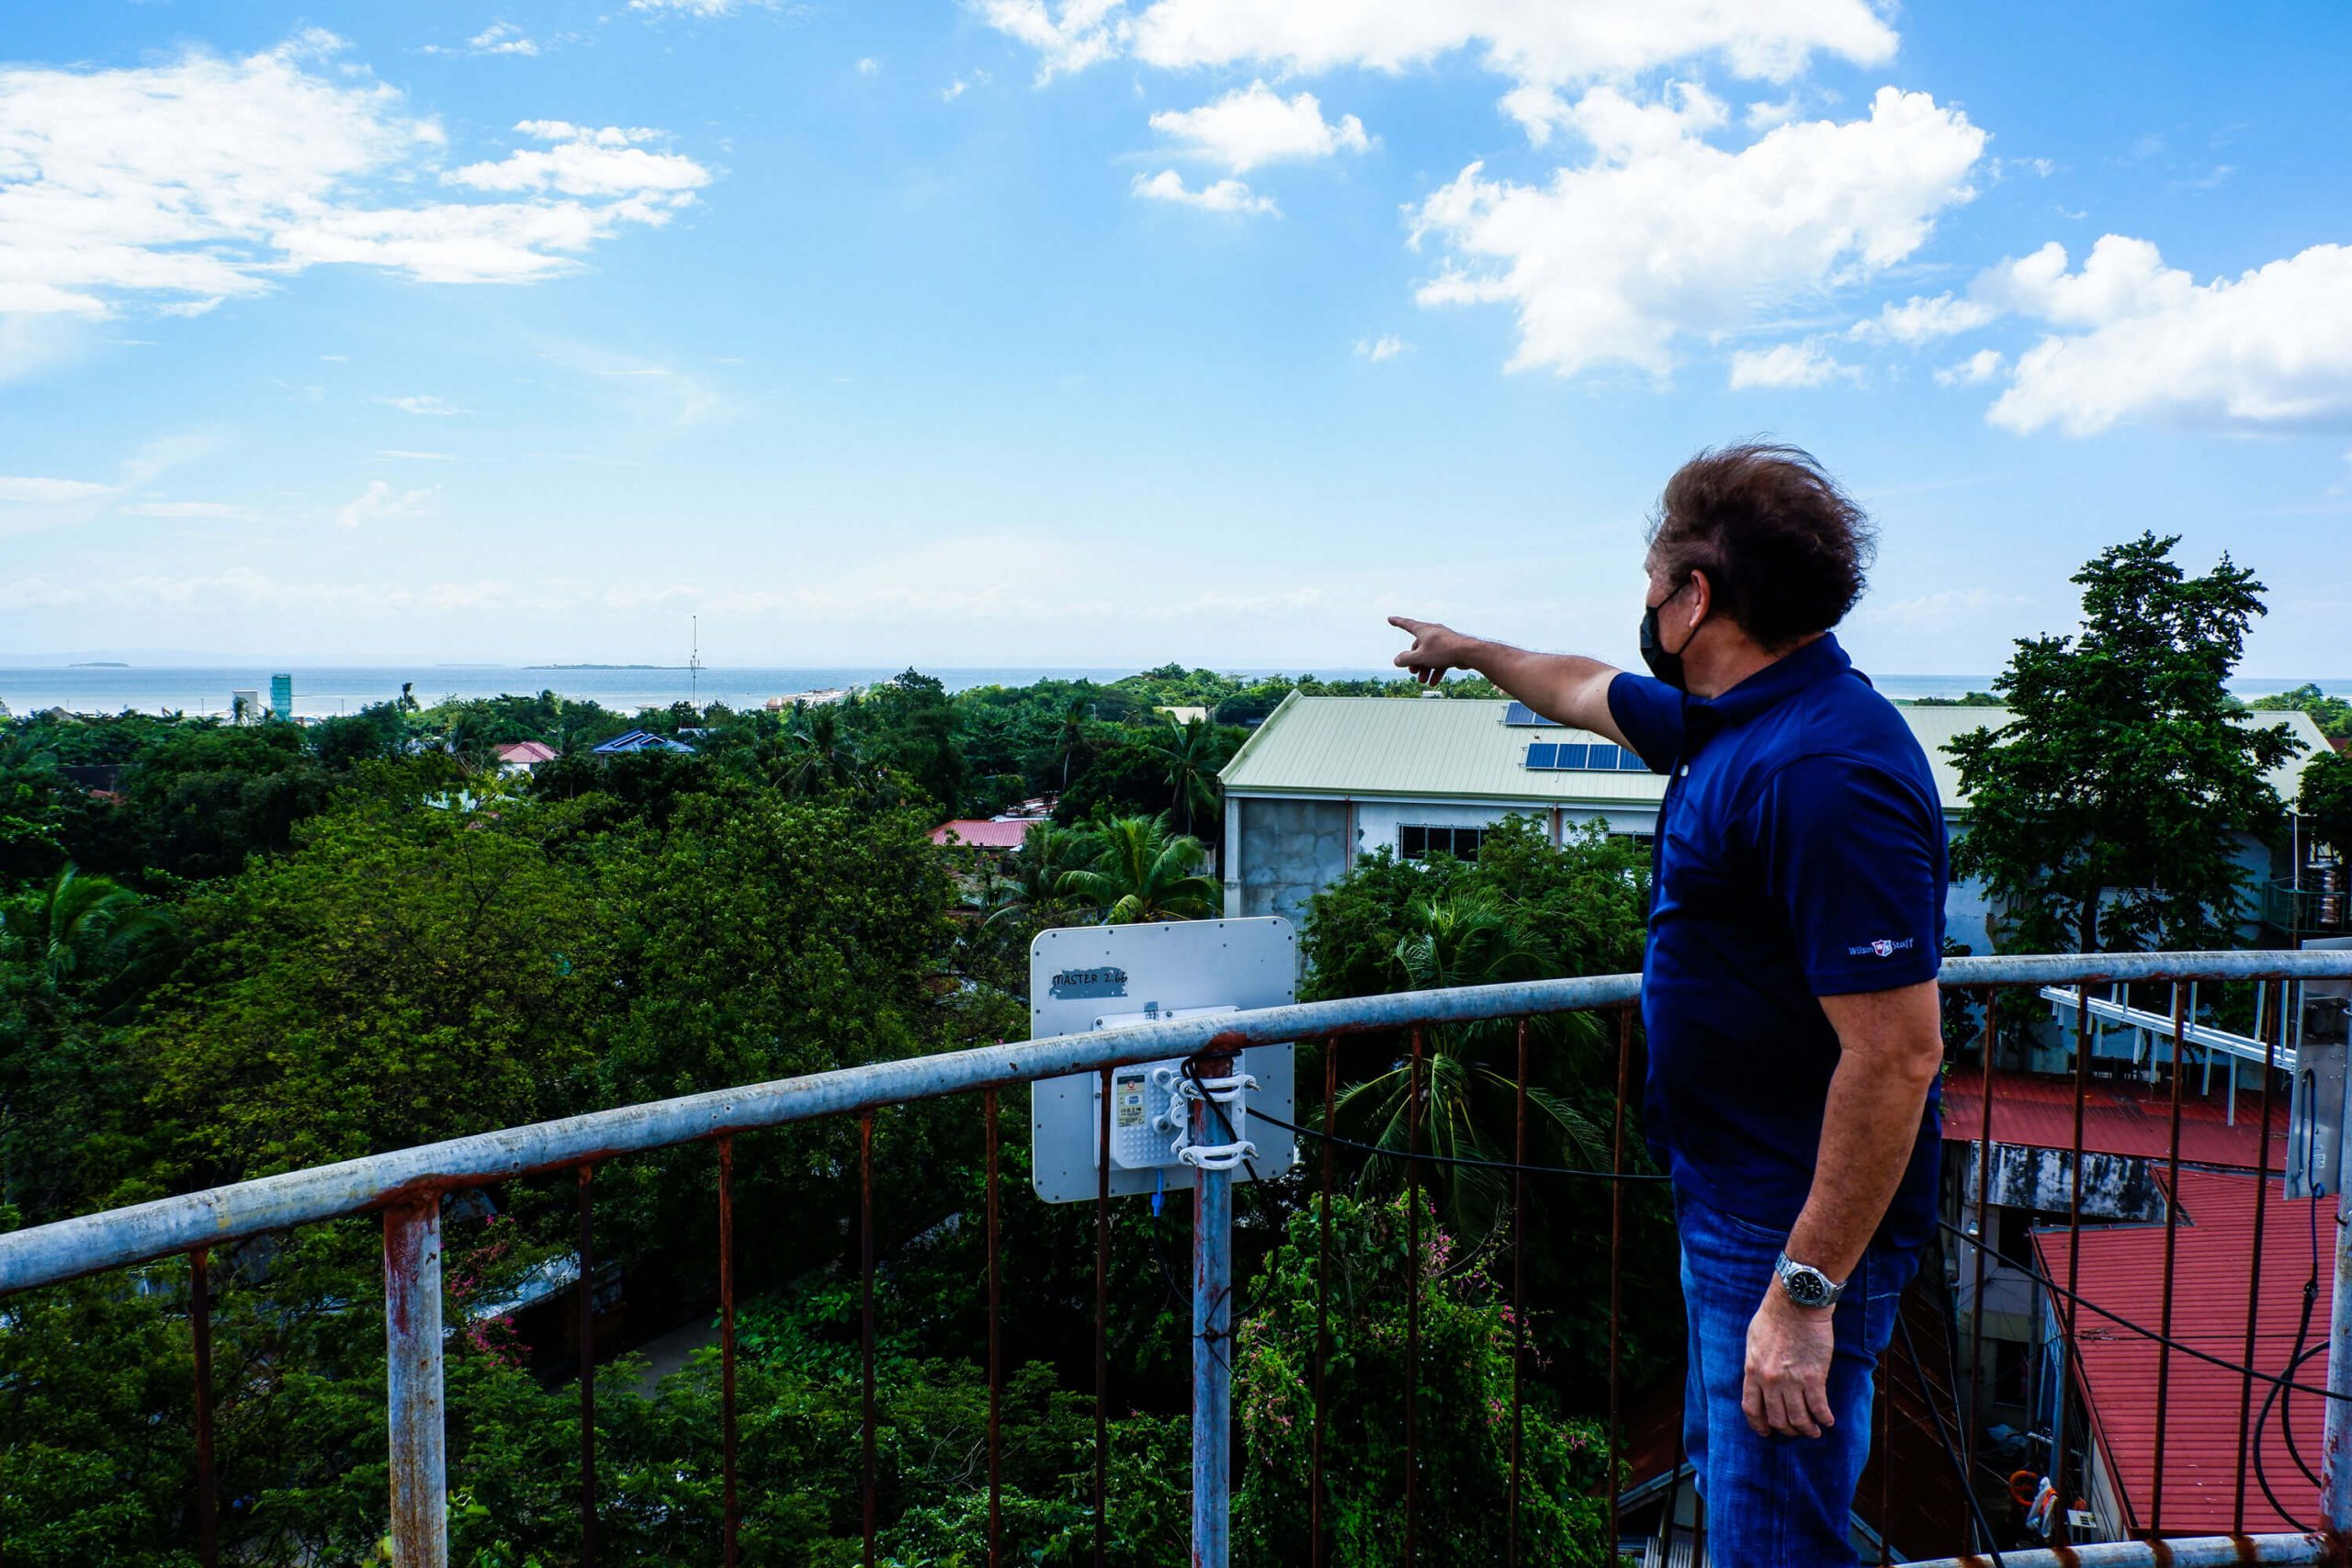 Jeff Llanto of the Central Visayas Information Sharing Network Foundation, Inc. (CVISNet) points to Gilutungan Island while on top of a water tank in the Cordova municipal hall. Attached to the railing beside him is a microwave dish that links the island to the town to synchronize data on a learning management system that runs independently in the remote barangay. That point-to-point connection also allows them to bridge the barangay to the high-speed internet they have in the town,